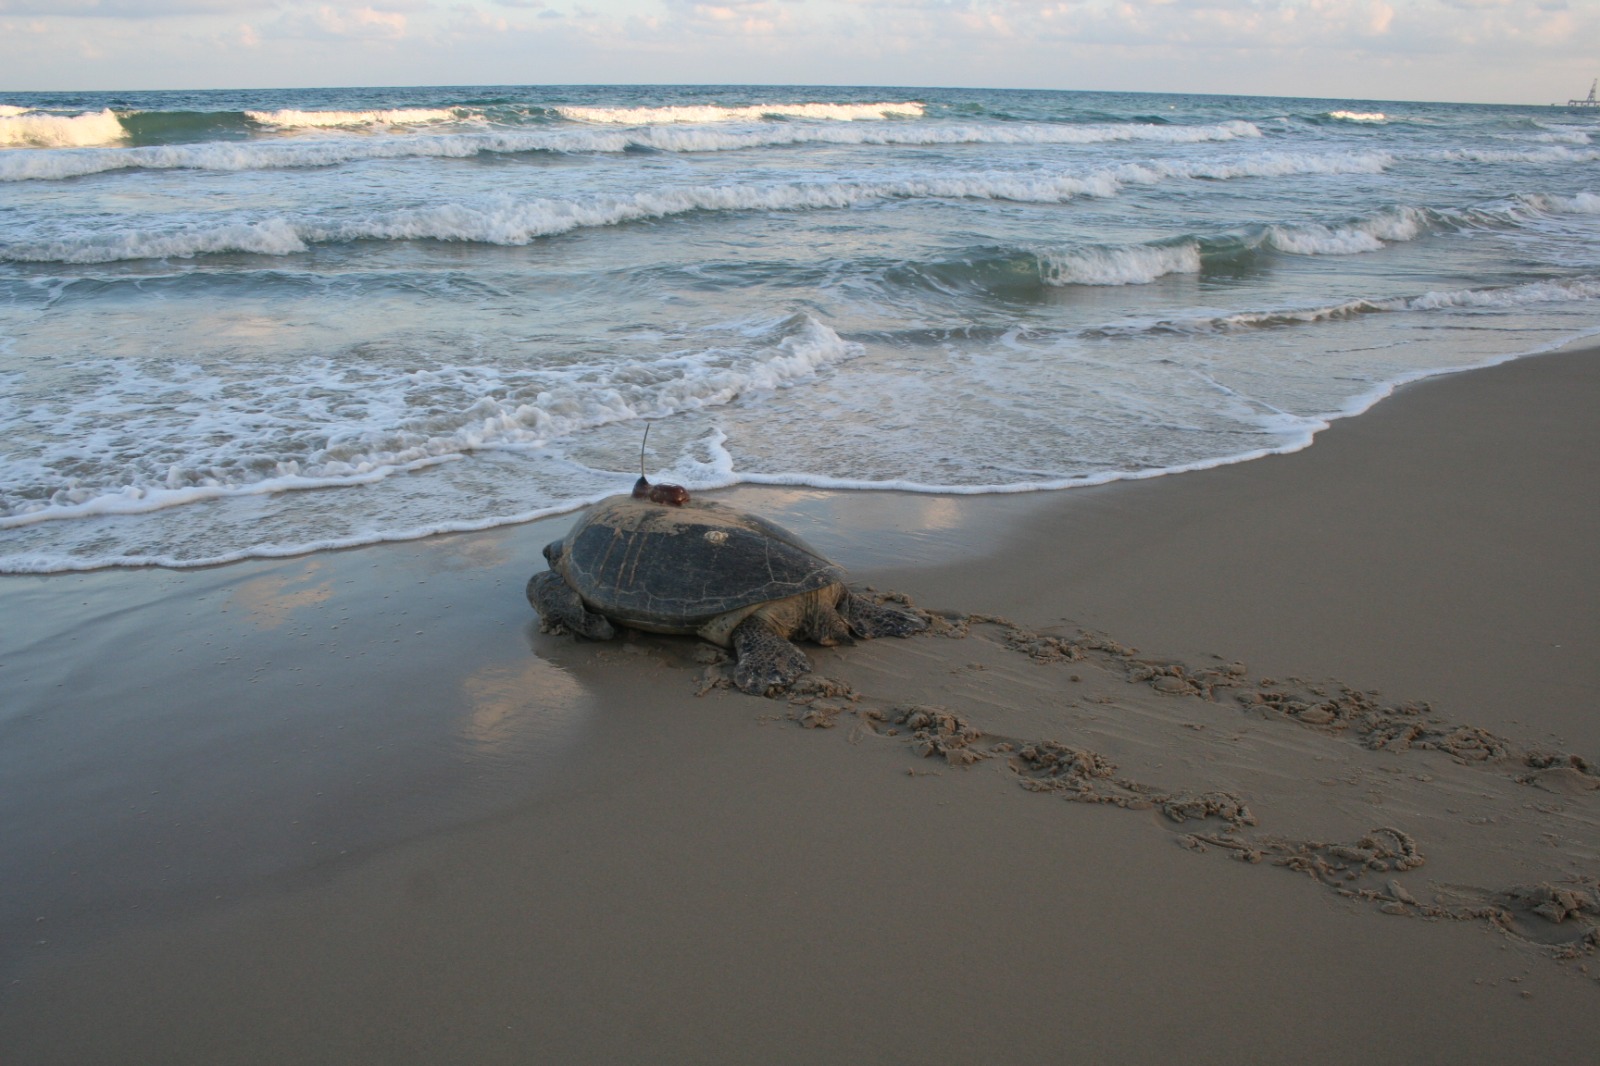 A time to lay: With turtle egg season underway, public asked to help | The  Times of Israel